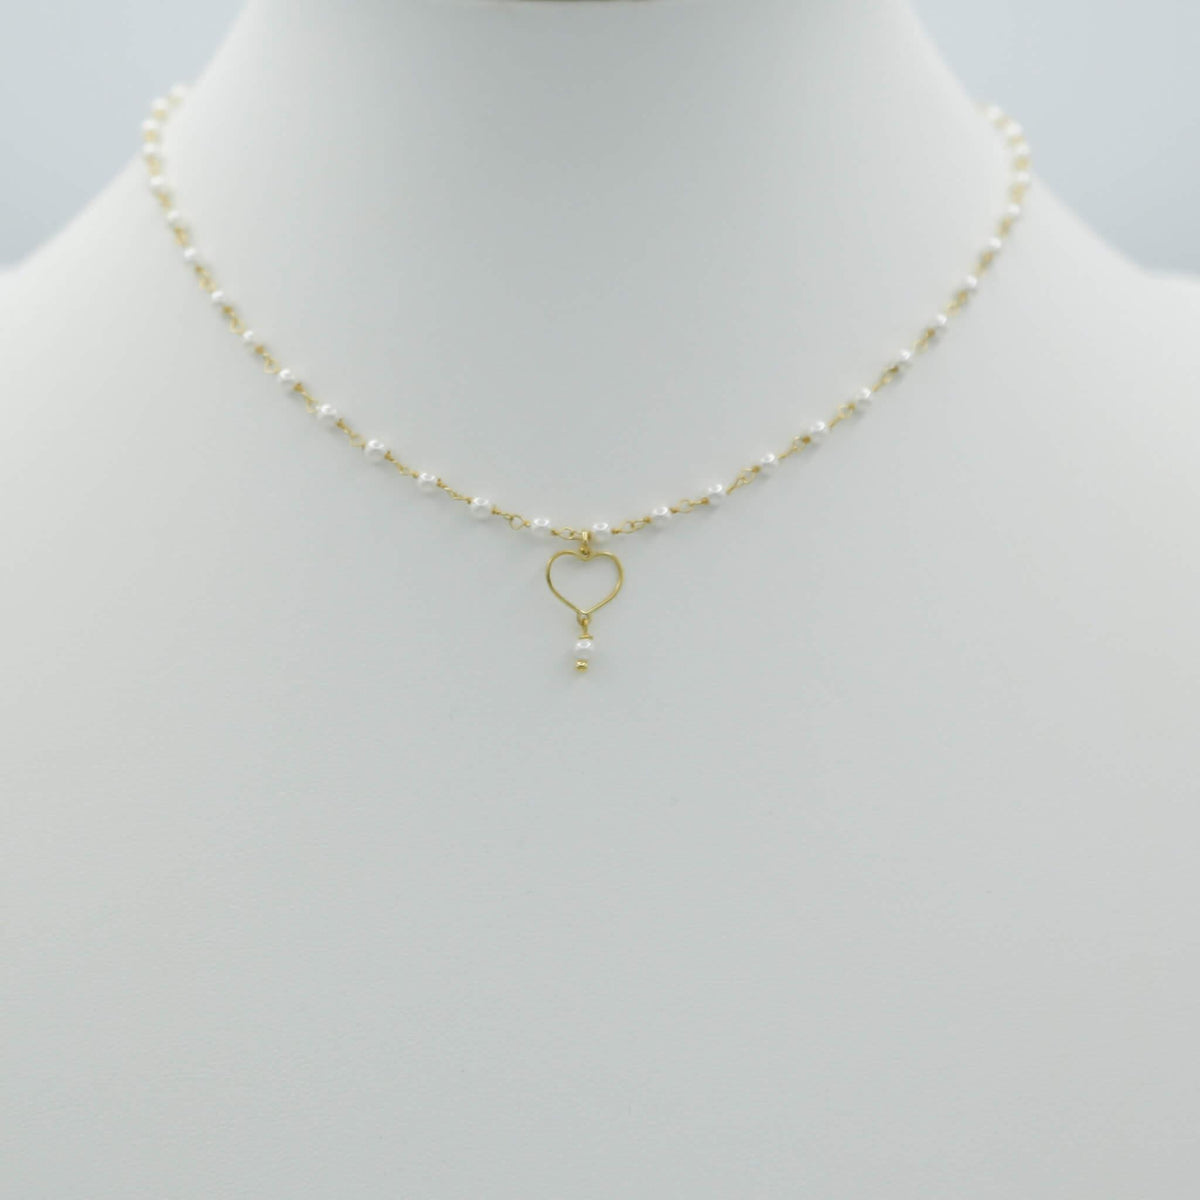 Octavia Multi Charm Necklace with Pearl and Glass